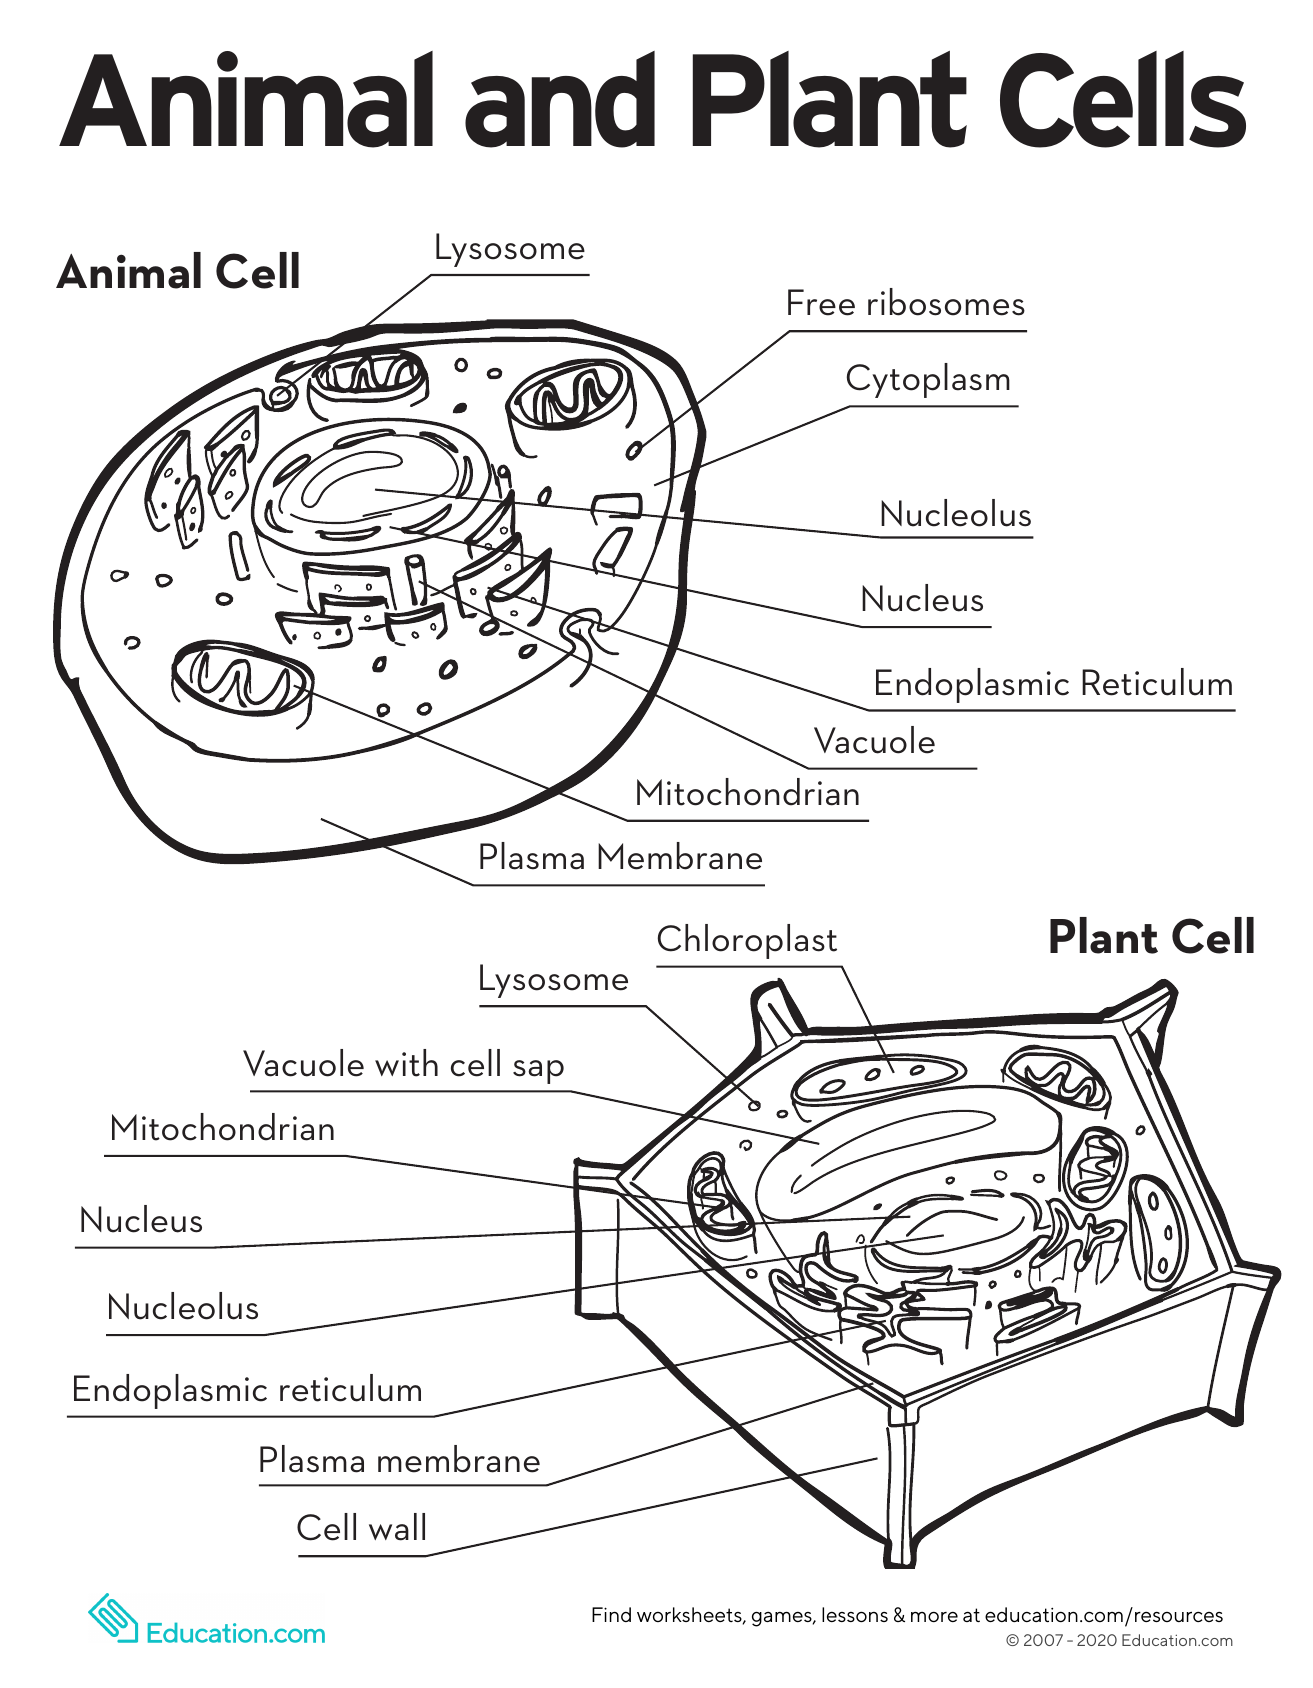 animal-and-plant-cells With Animal And Plant Cells Worksheet